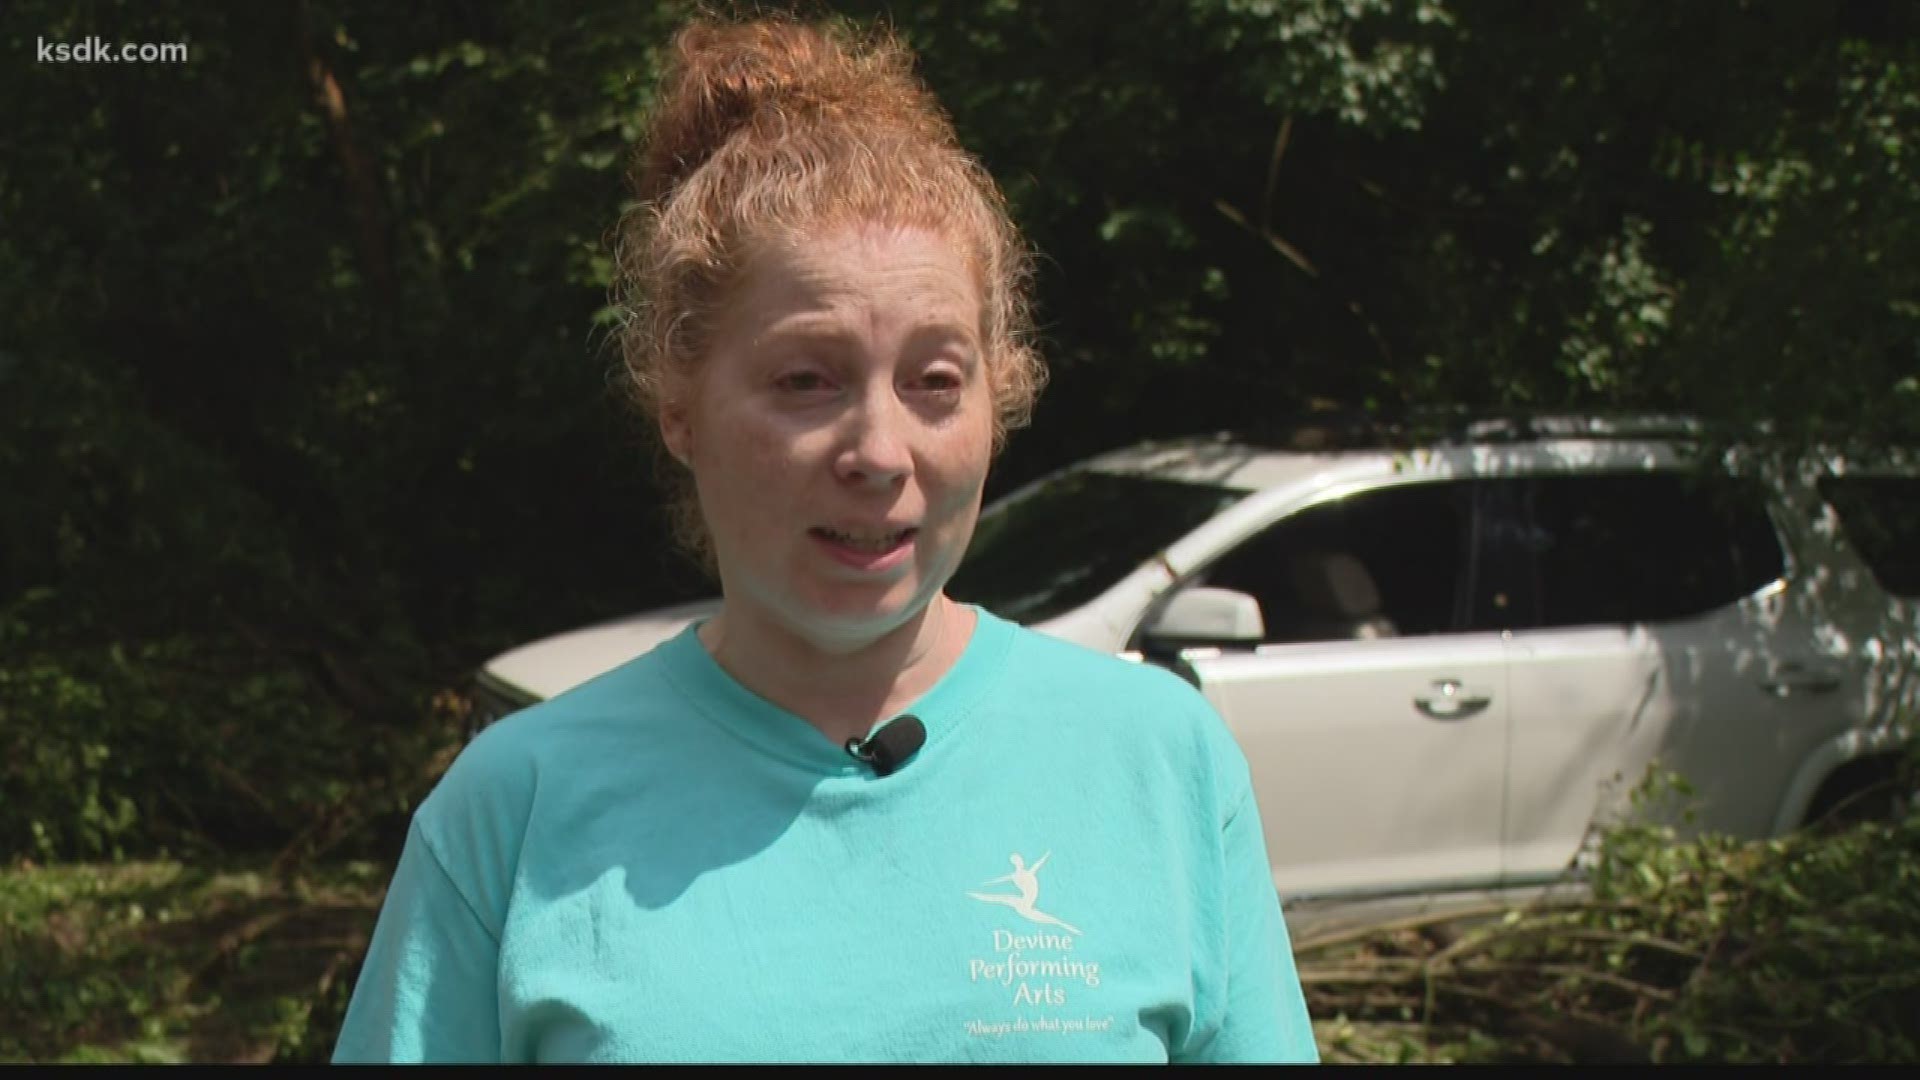 "I felt like I was there by myself and I didn’t know if anyone was going to be able to get to me. I was really scared,” Eureka woman holds tree to avoid flash flood.